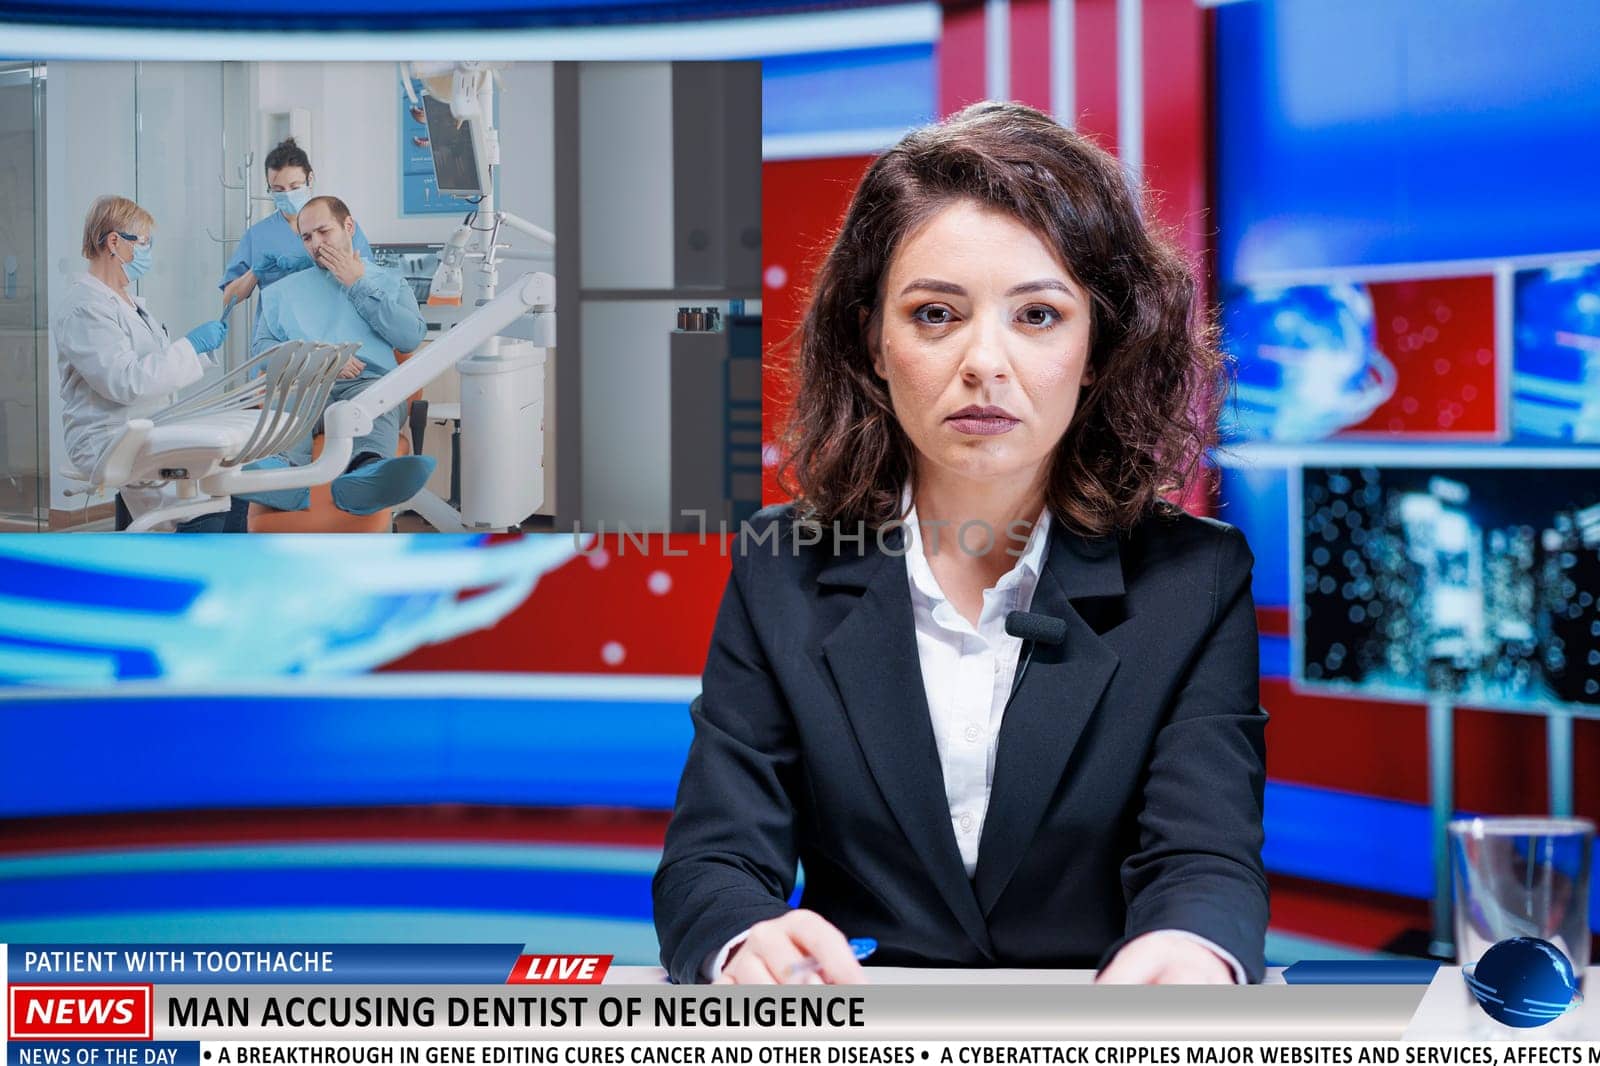 Worrying news about dentist incompetence on live tv channel, presenter doing newscast about stomatology patient with dental problems. Person with toothache suing dentistry cabinet.